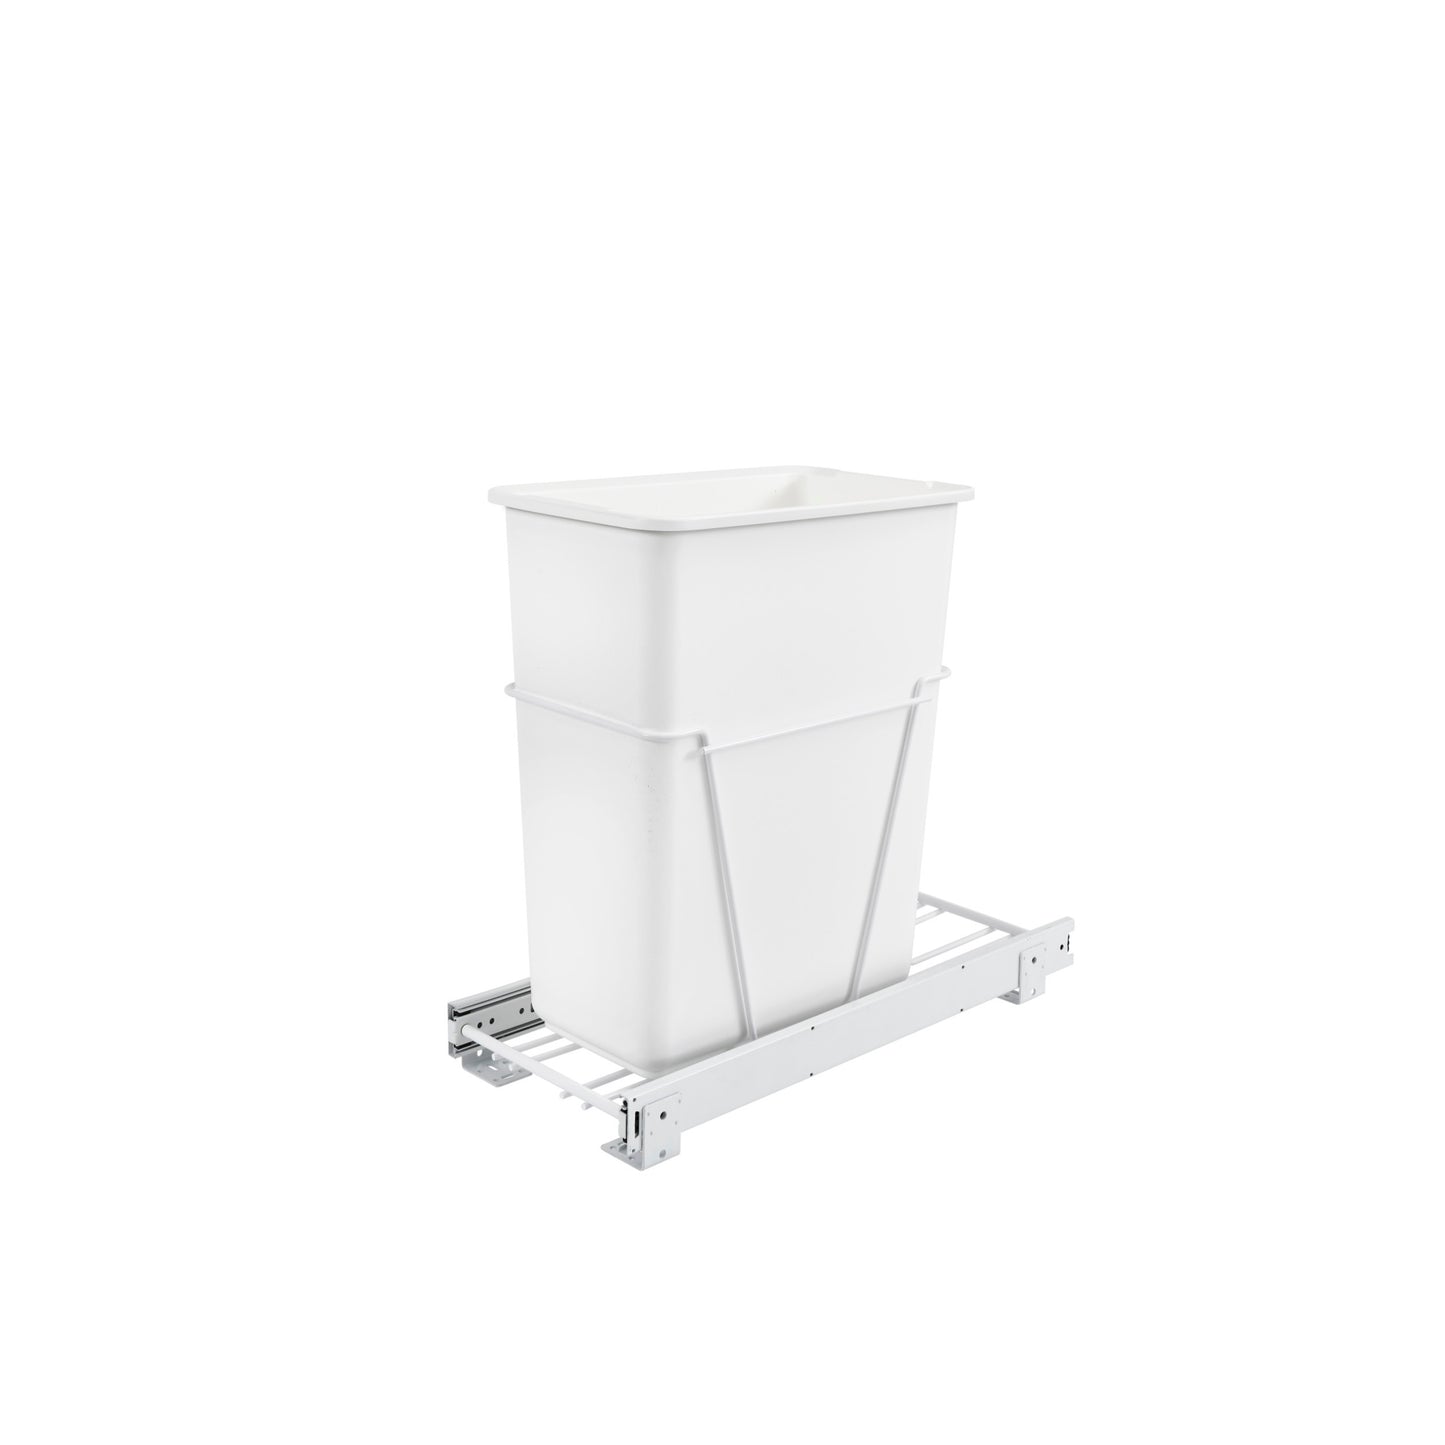 Rev-A-Shelf / RV-9PB S / White Steel Pullout Waste/Trash Container